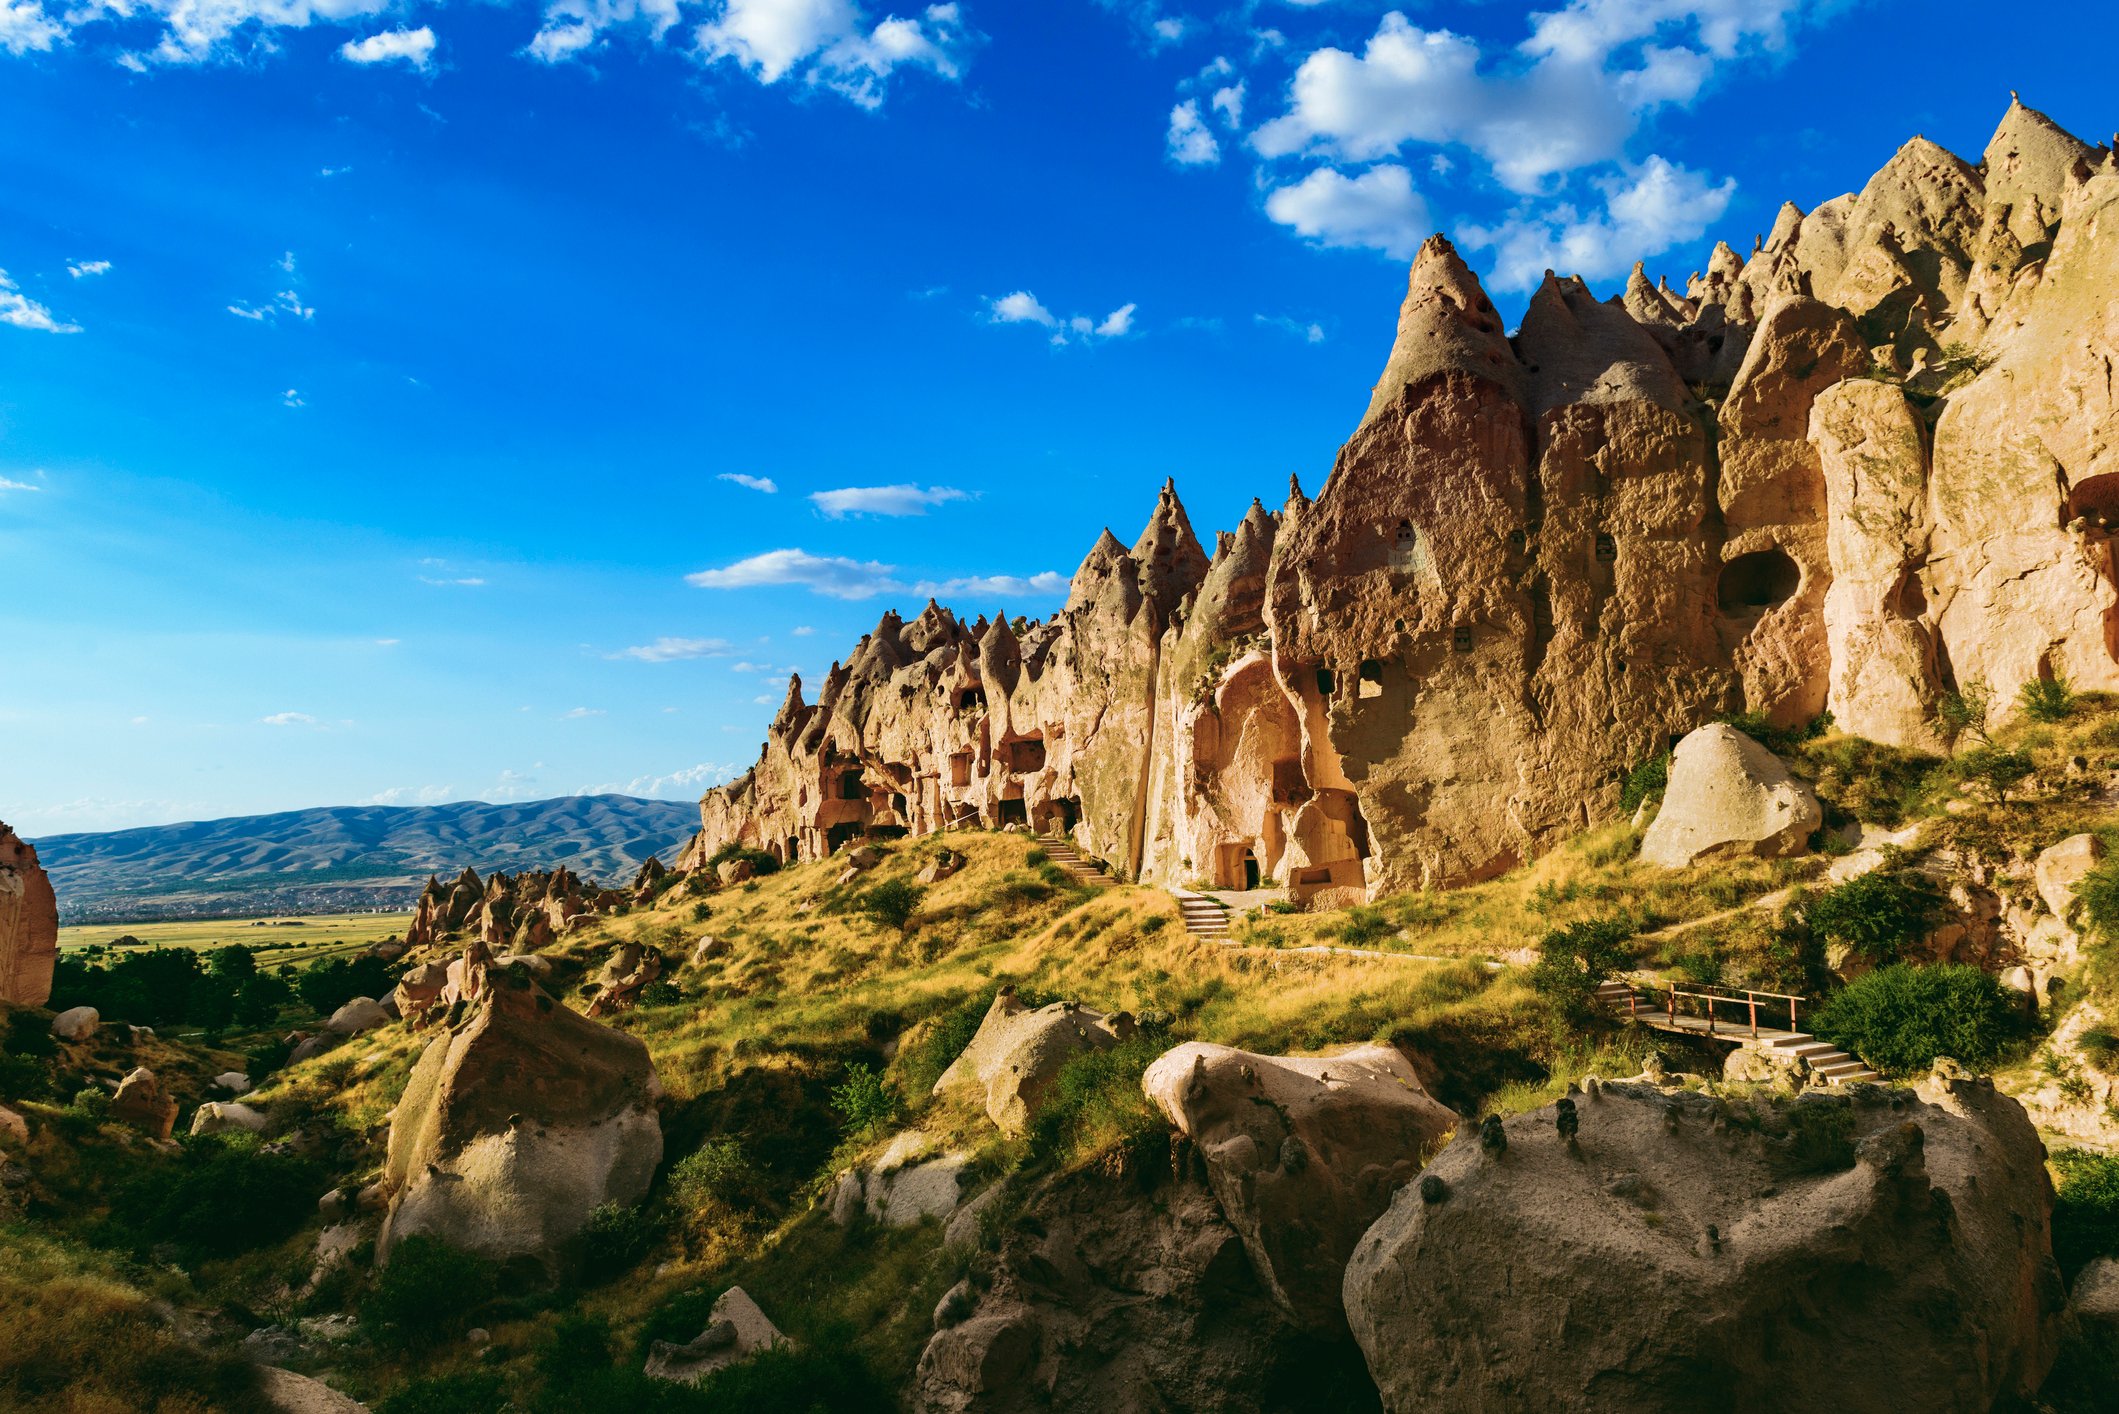 Hundreds of cave dwellings have been carved out of the soft volcanic tufa rock in this area. (iStock Photo)